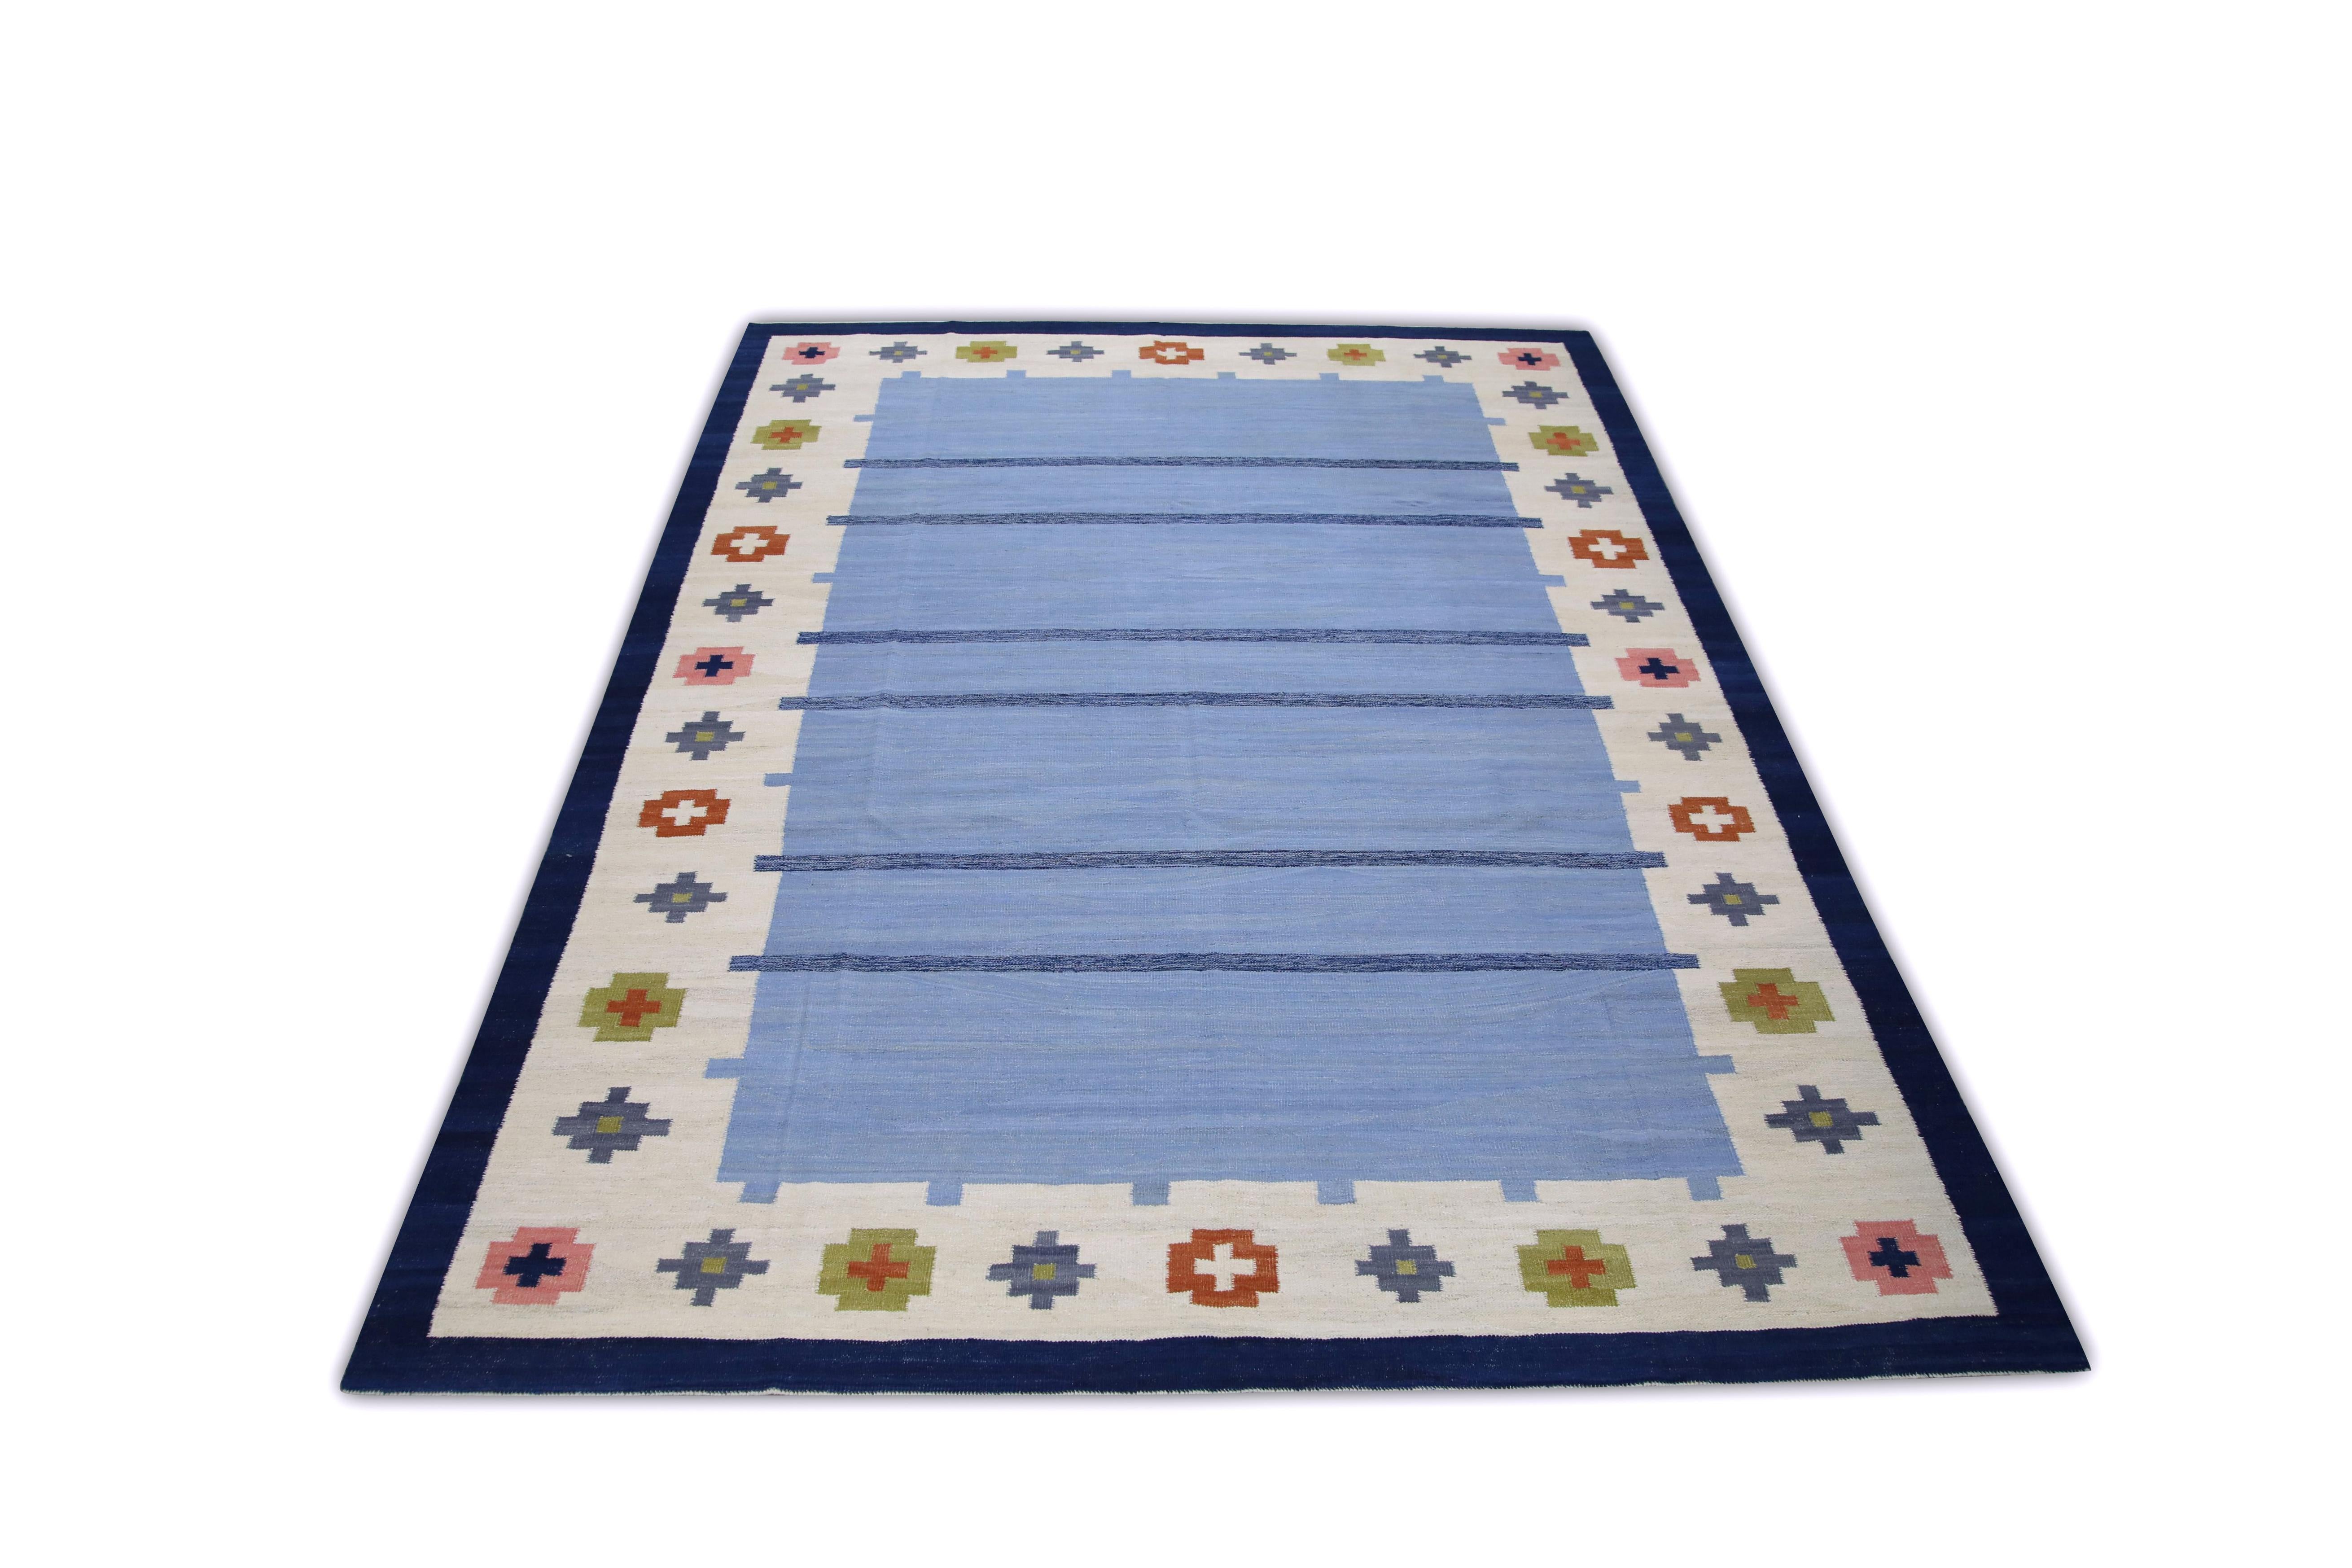 This exquisite Turkish flatweave kilim rug is a stunning masterpiece of traditional craftsmanship. Each rug is meticulously handwoven by skilled artisans using age-old techniques that have been passed down through generations. The intricate design